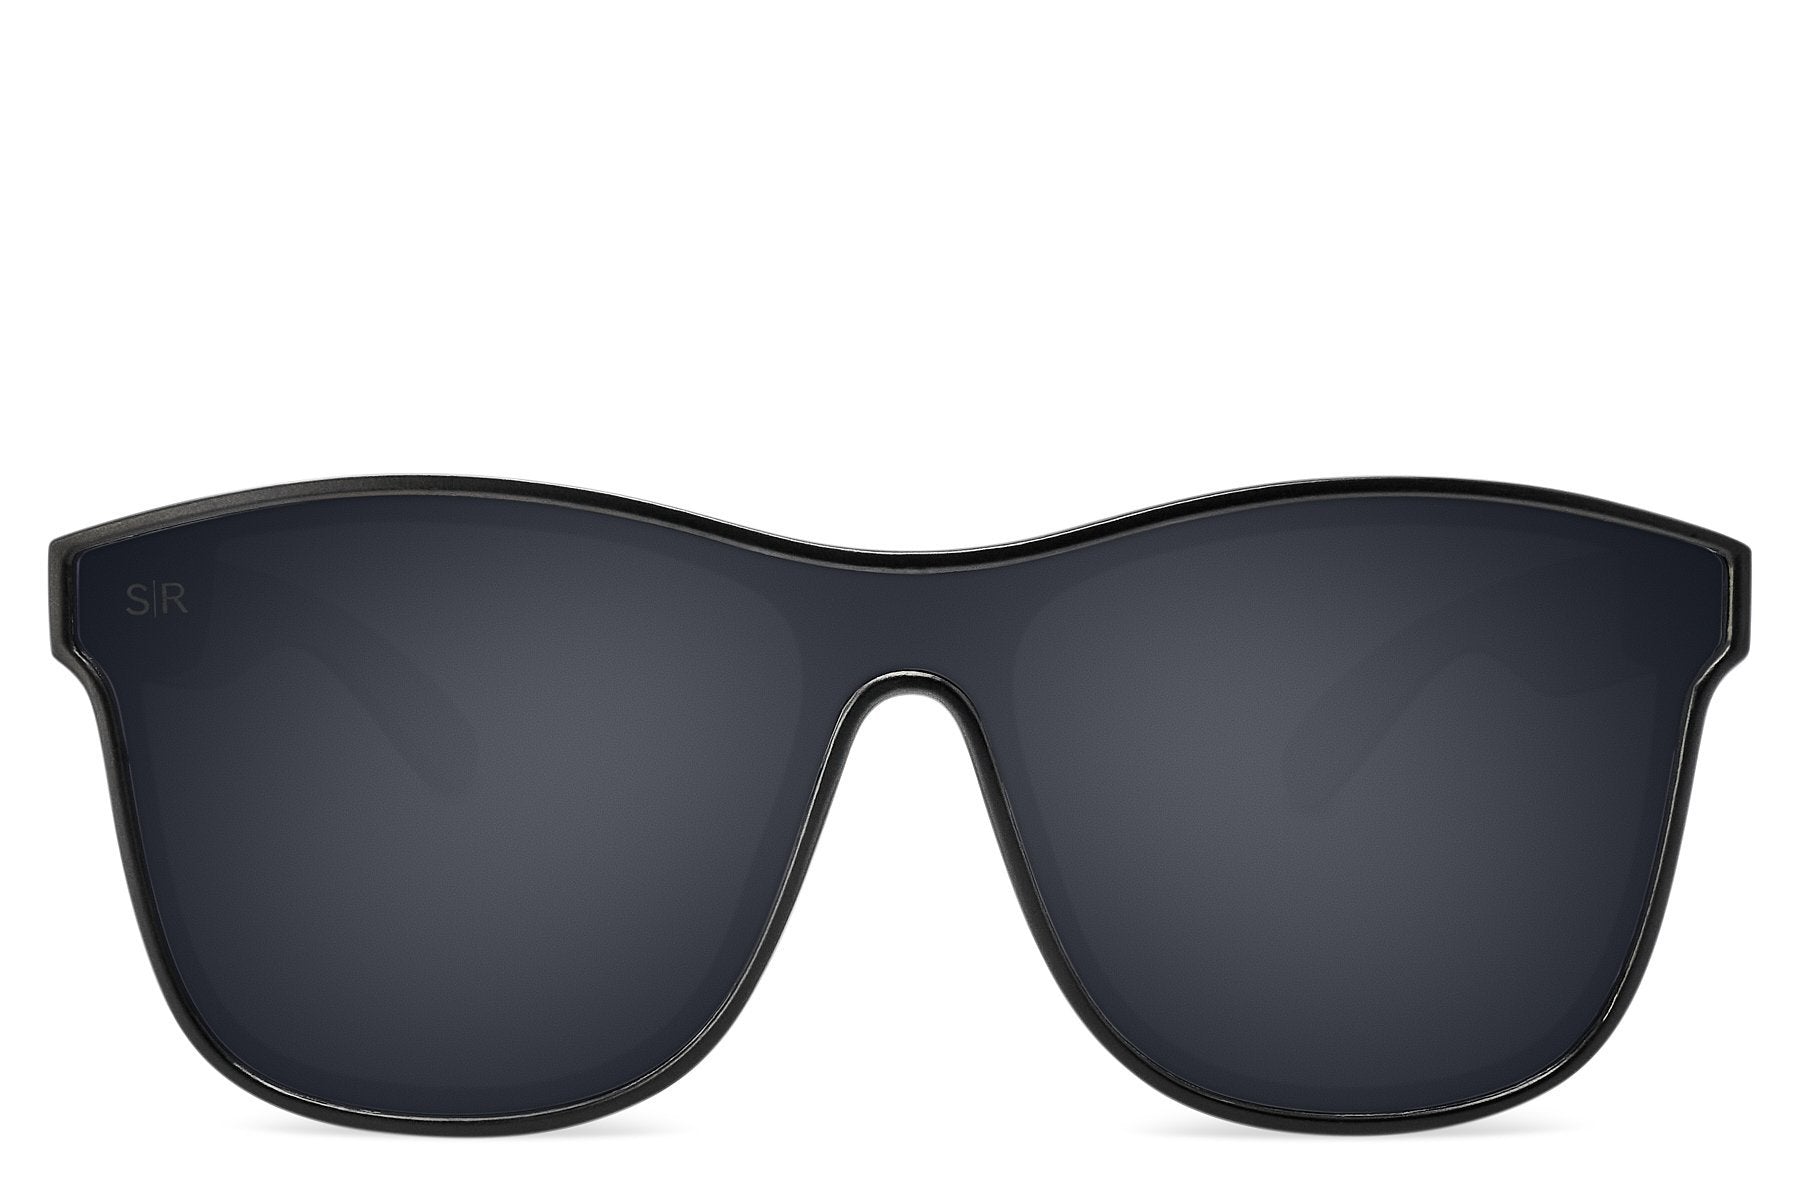 Highrise - Blackout Polarized Sunglasses | Matte Black Sunglasses | Best Christmas Gifts | Gifts for The Holidays | Unique Gifts for Friends| Shady